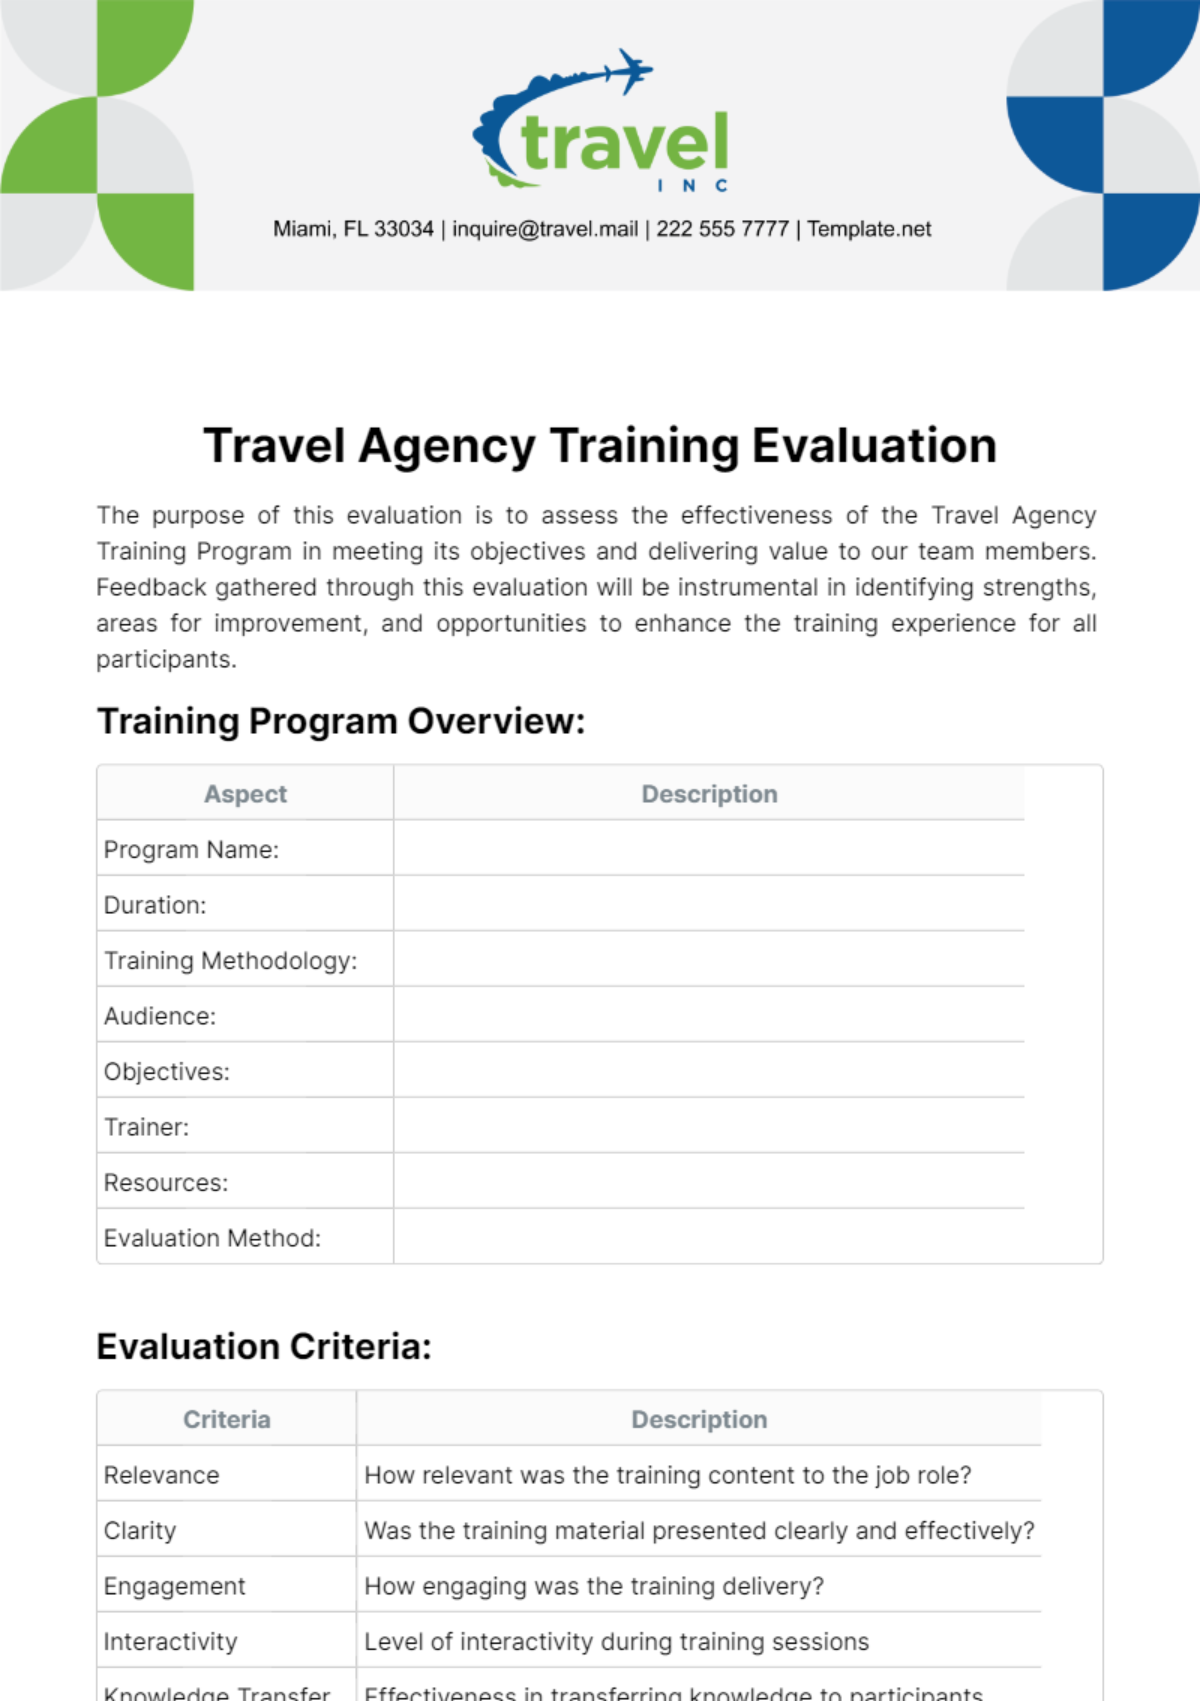 Free Travel Agency Training Evaluation Template